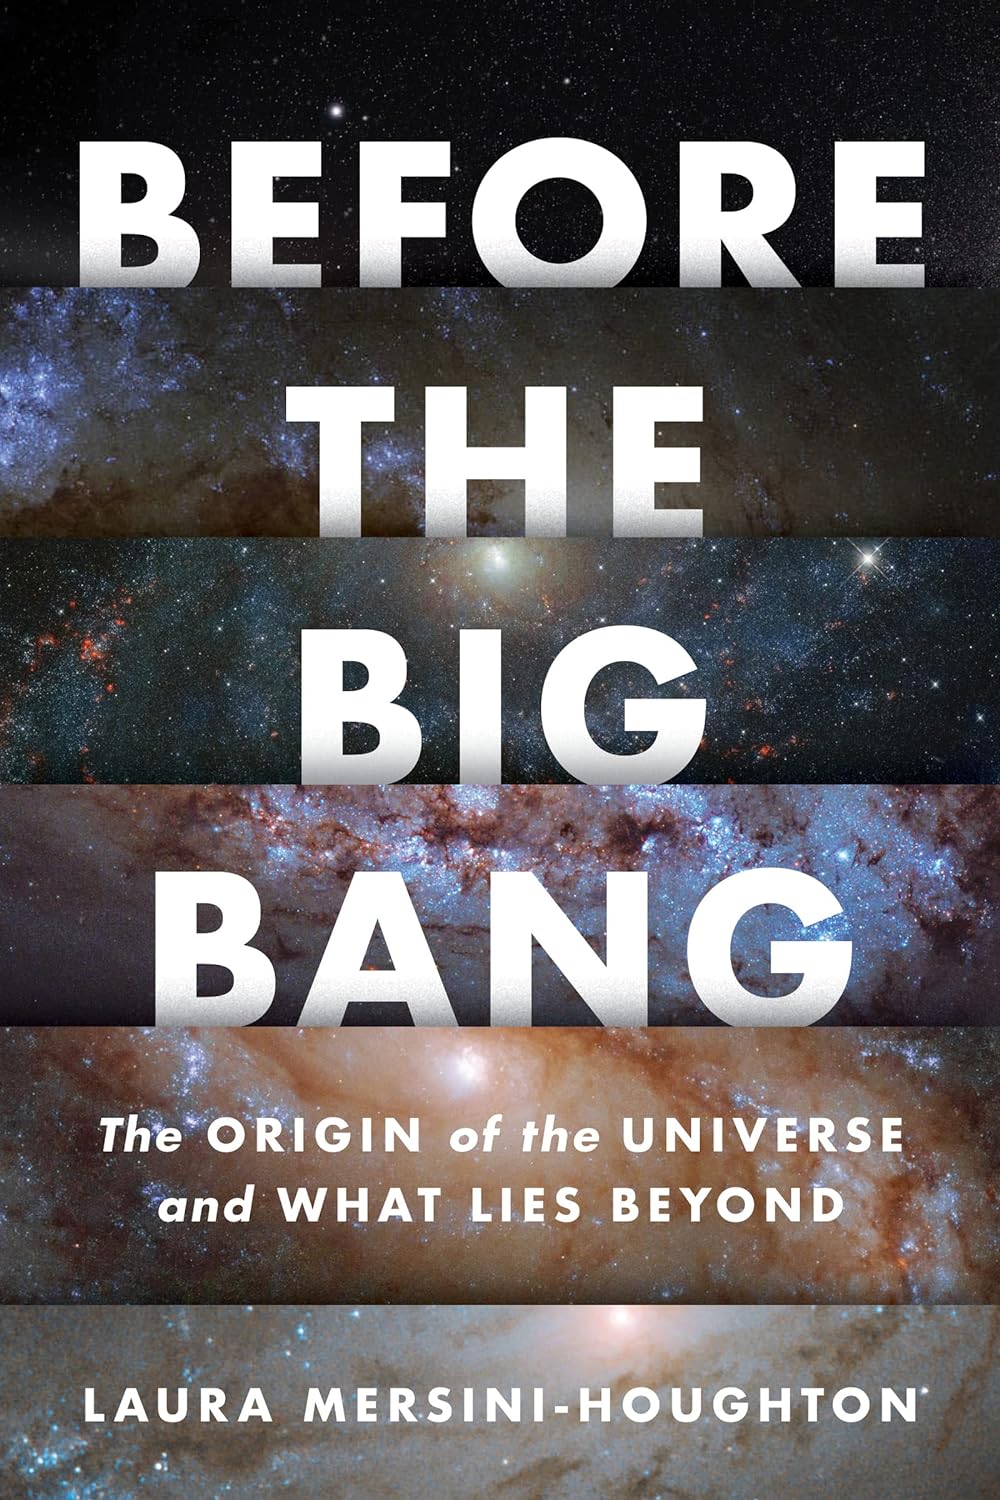 Before The Big Bang: The Origin of the Universe and What Lies Beyond